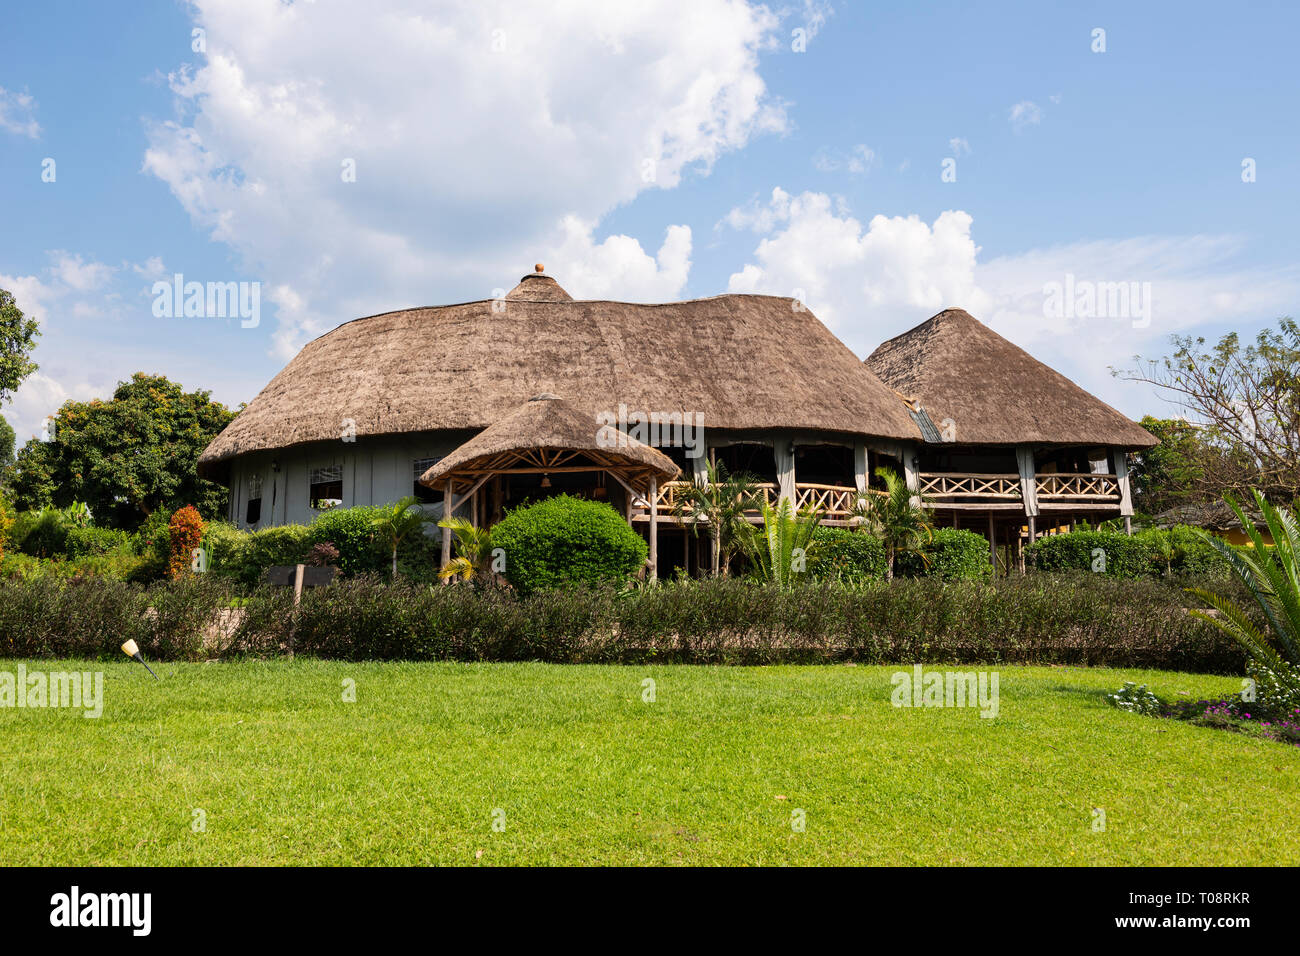 Crater Safari Lodge located close to Kibale Forest National Park in South West Uganda, East Africa Stock Photo